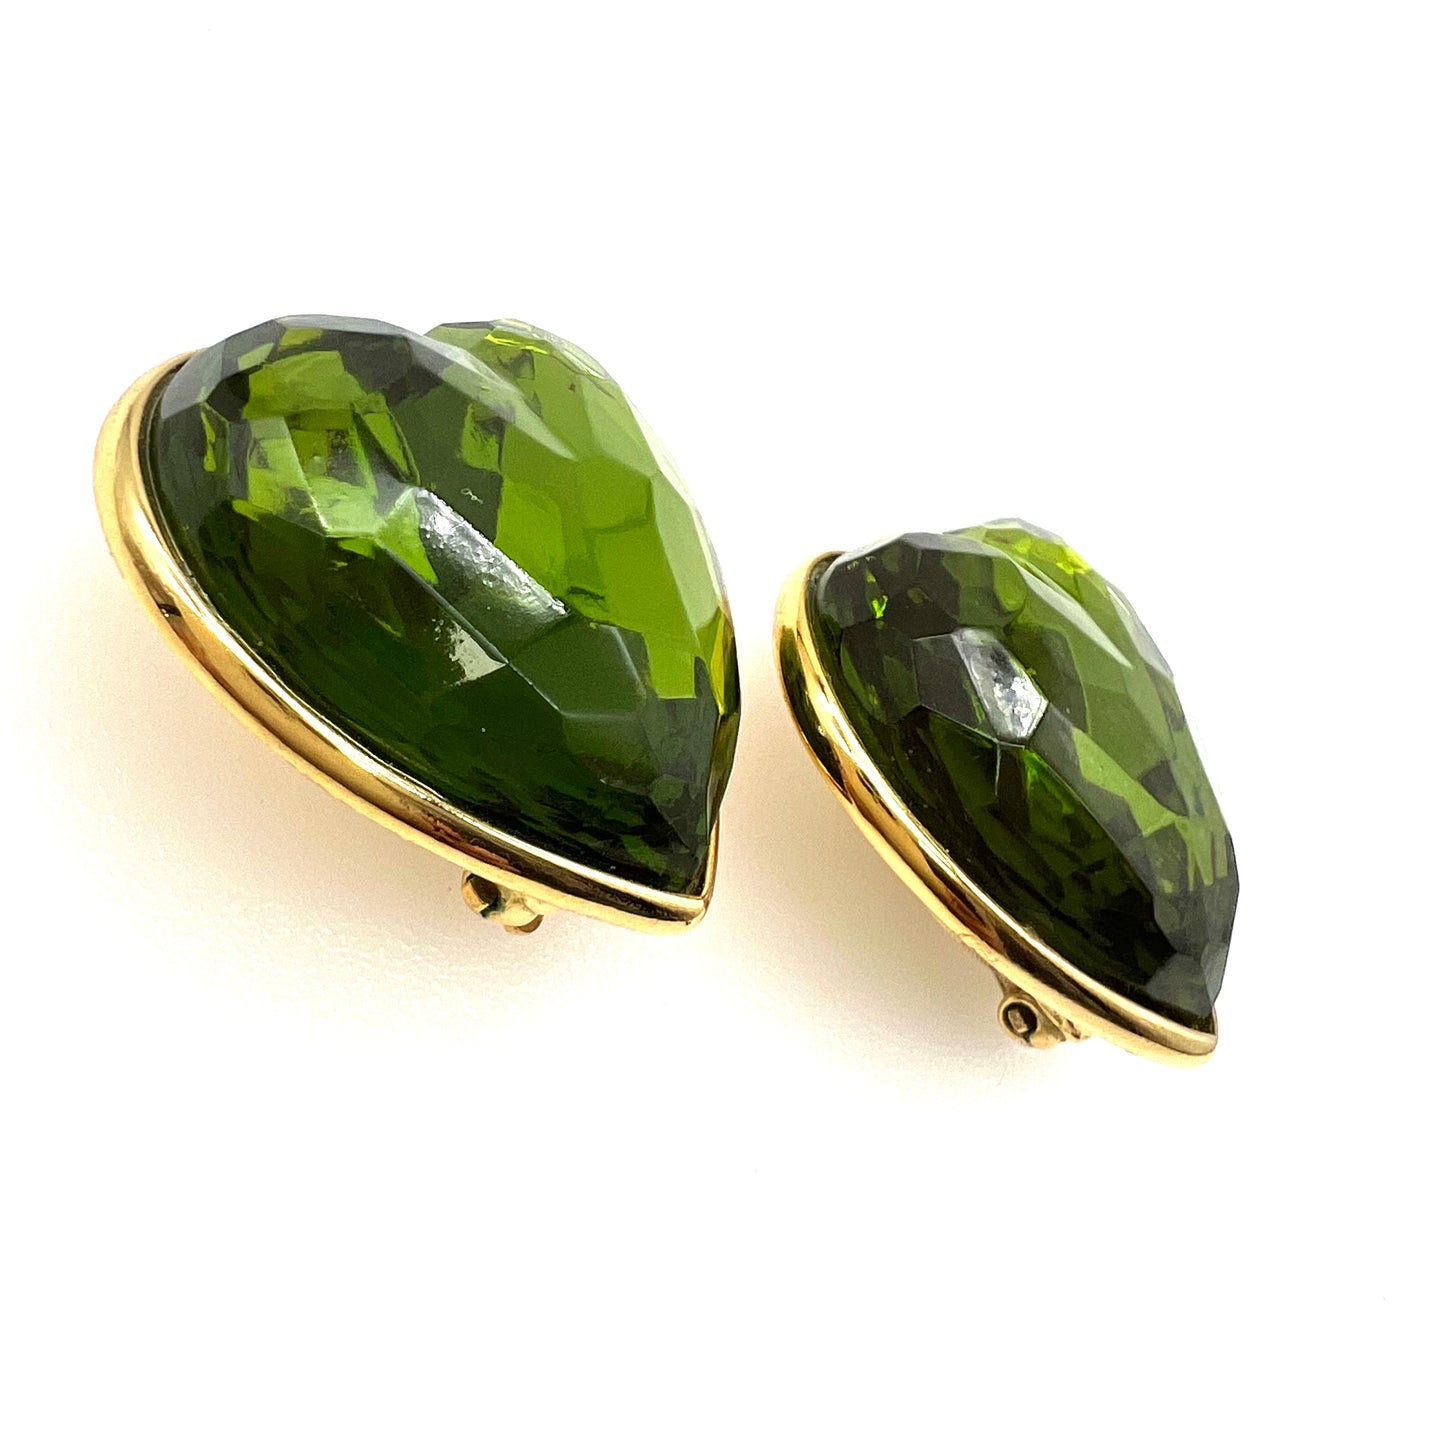 Yves Saint Laurent By Robert Goossens Large Heart-Shaped Chartreuse Faceted Resin Clip On Earrings In Original Box